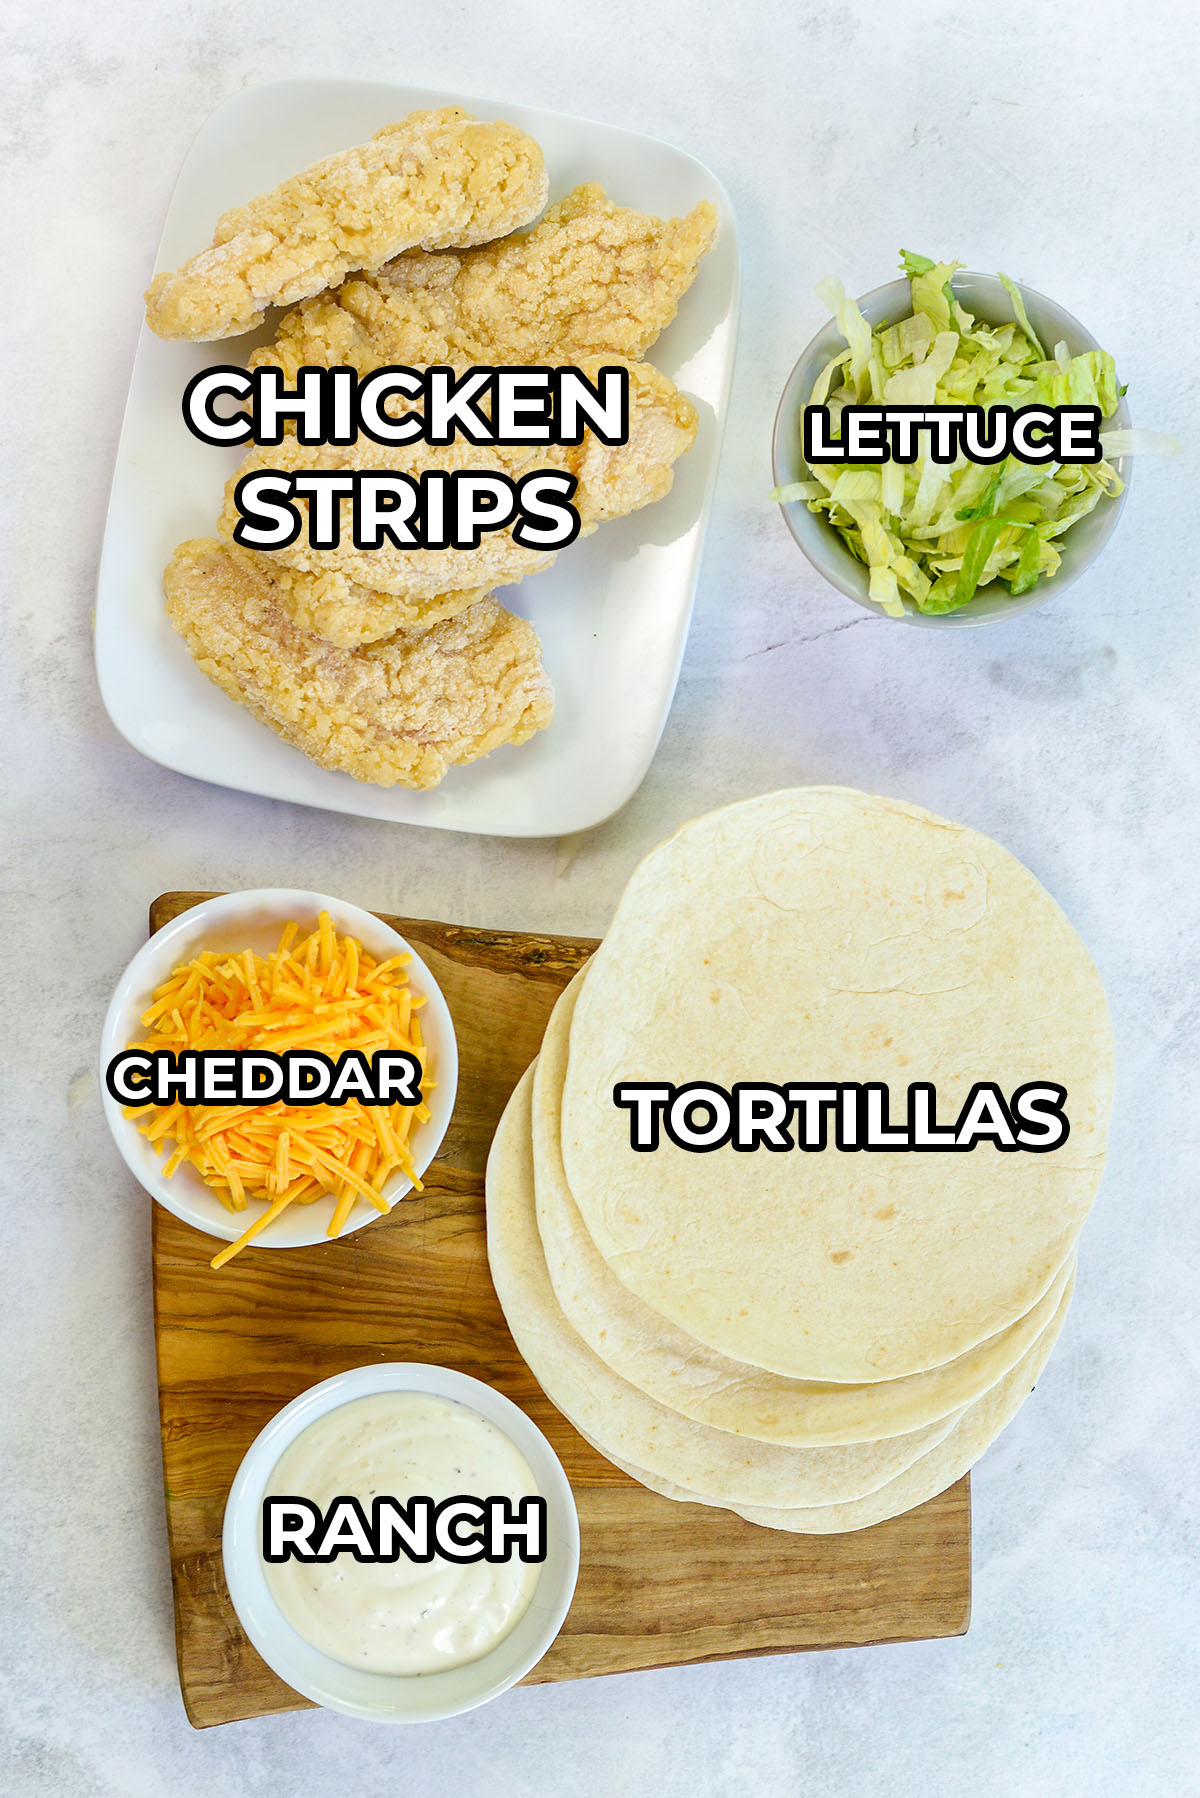 Ingredients for chicken snack wraps spread out on a countertop.